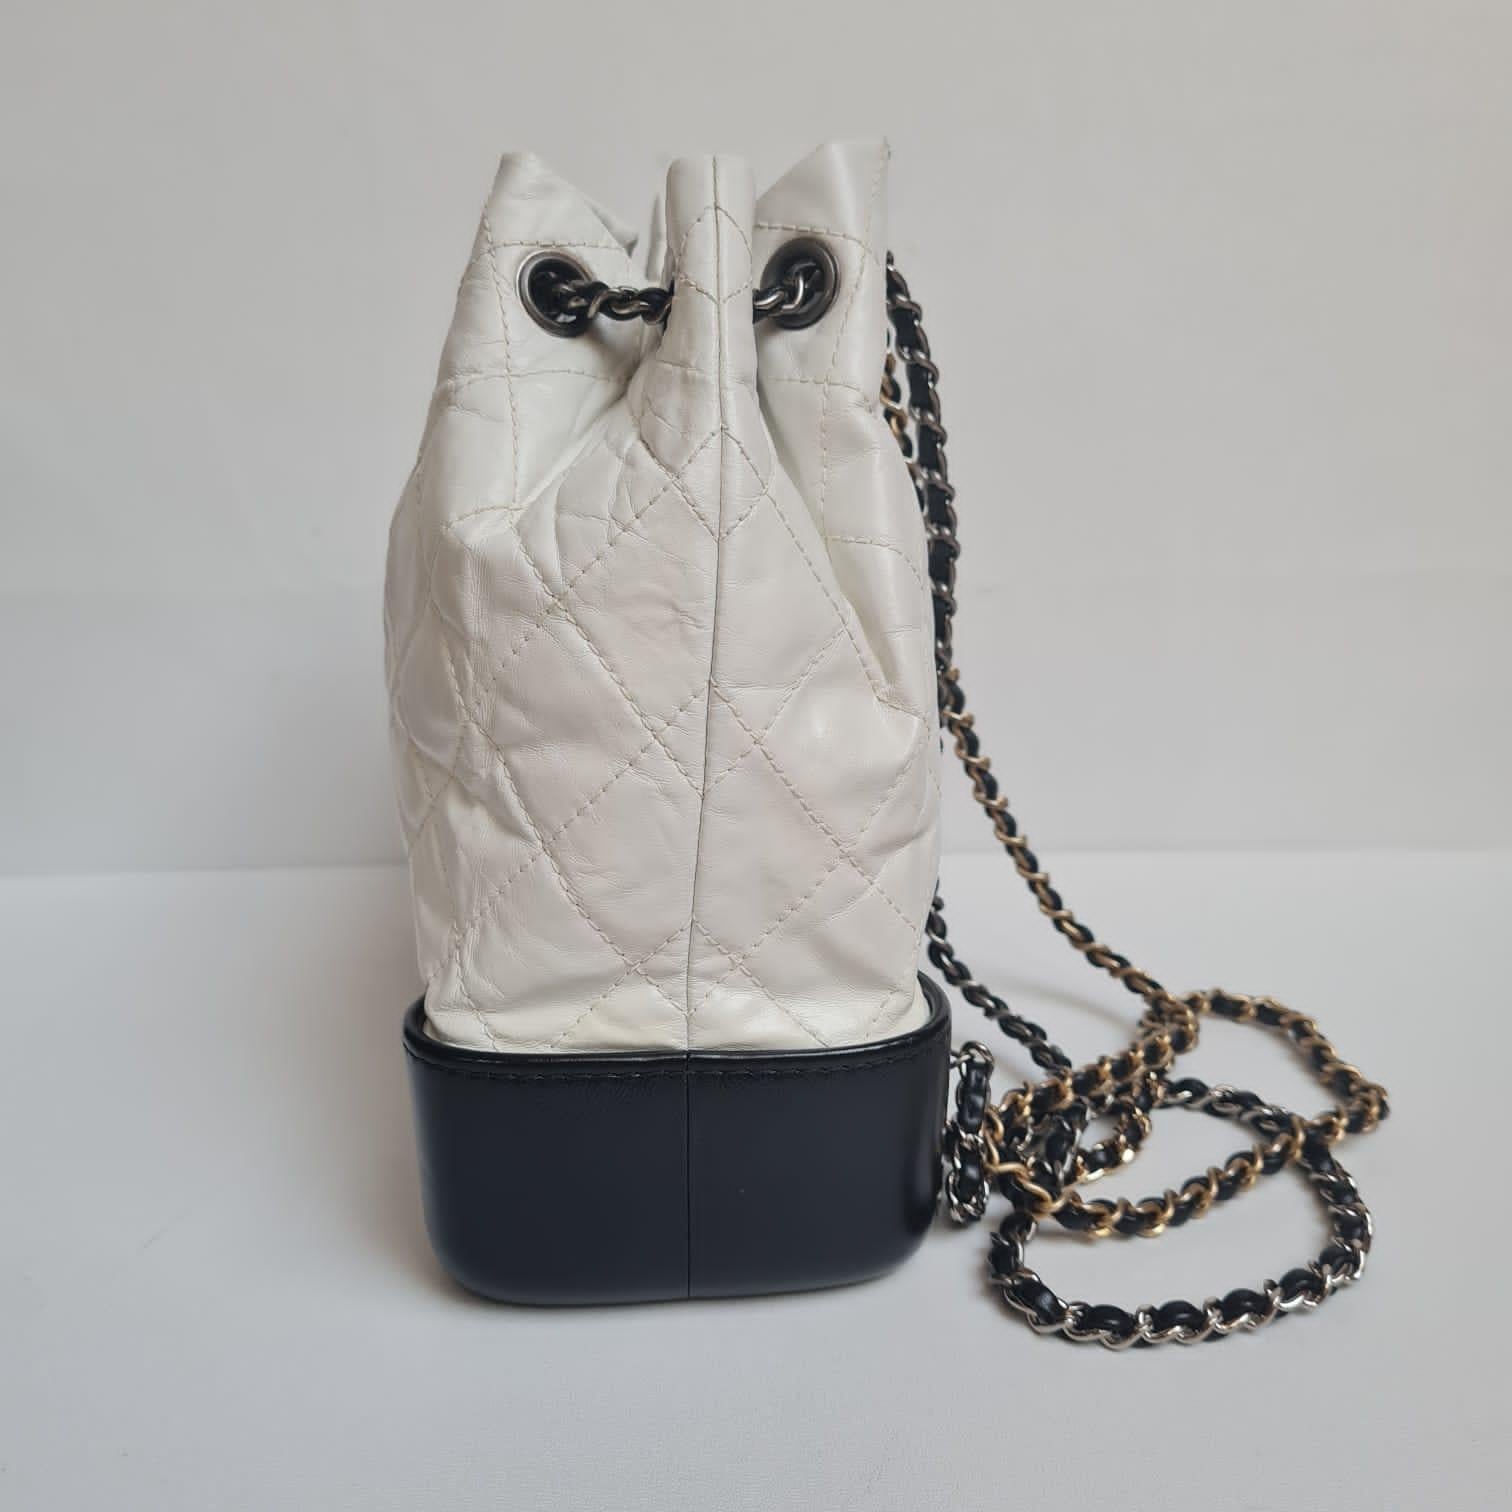 Chanel White Lambskin Quilted Gabrielle Backpack In Good Condition For Sale In Jakarta, Daerah Khusus Ibukota Jakarta